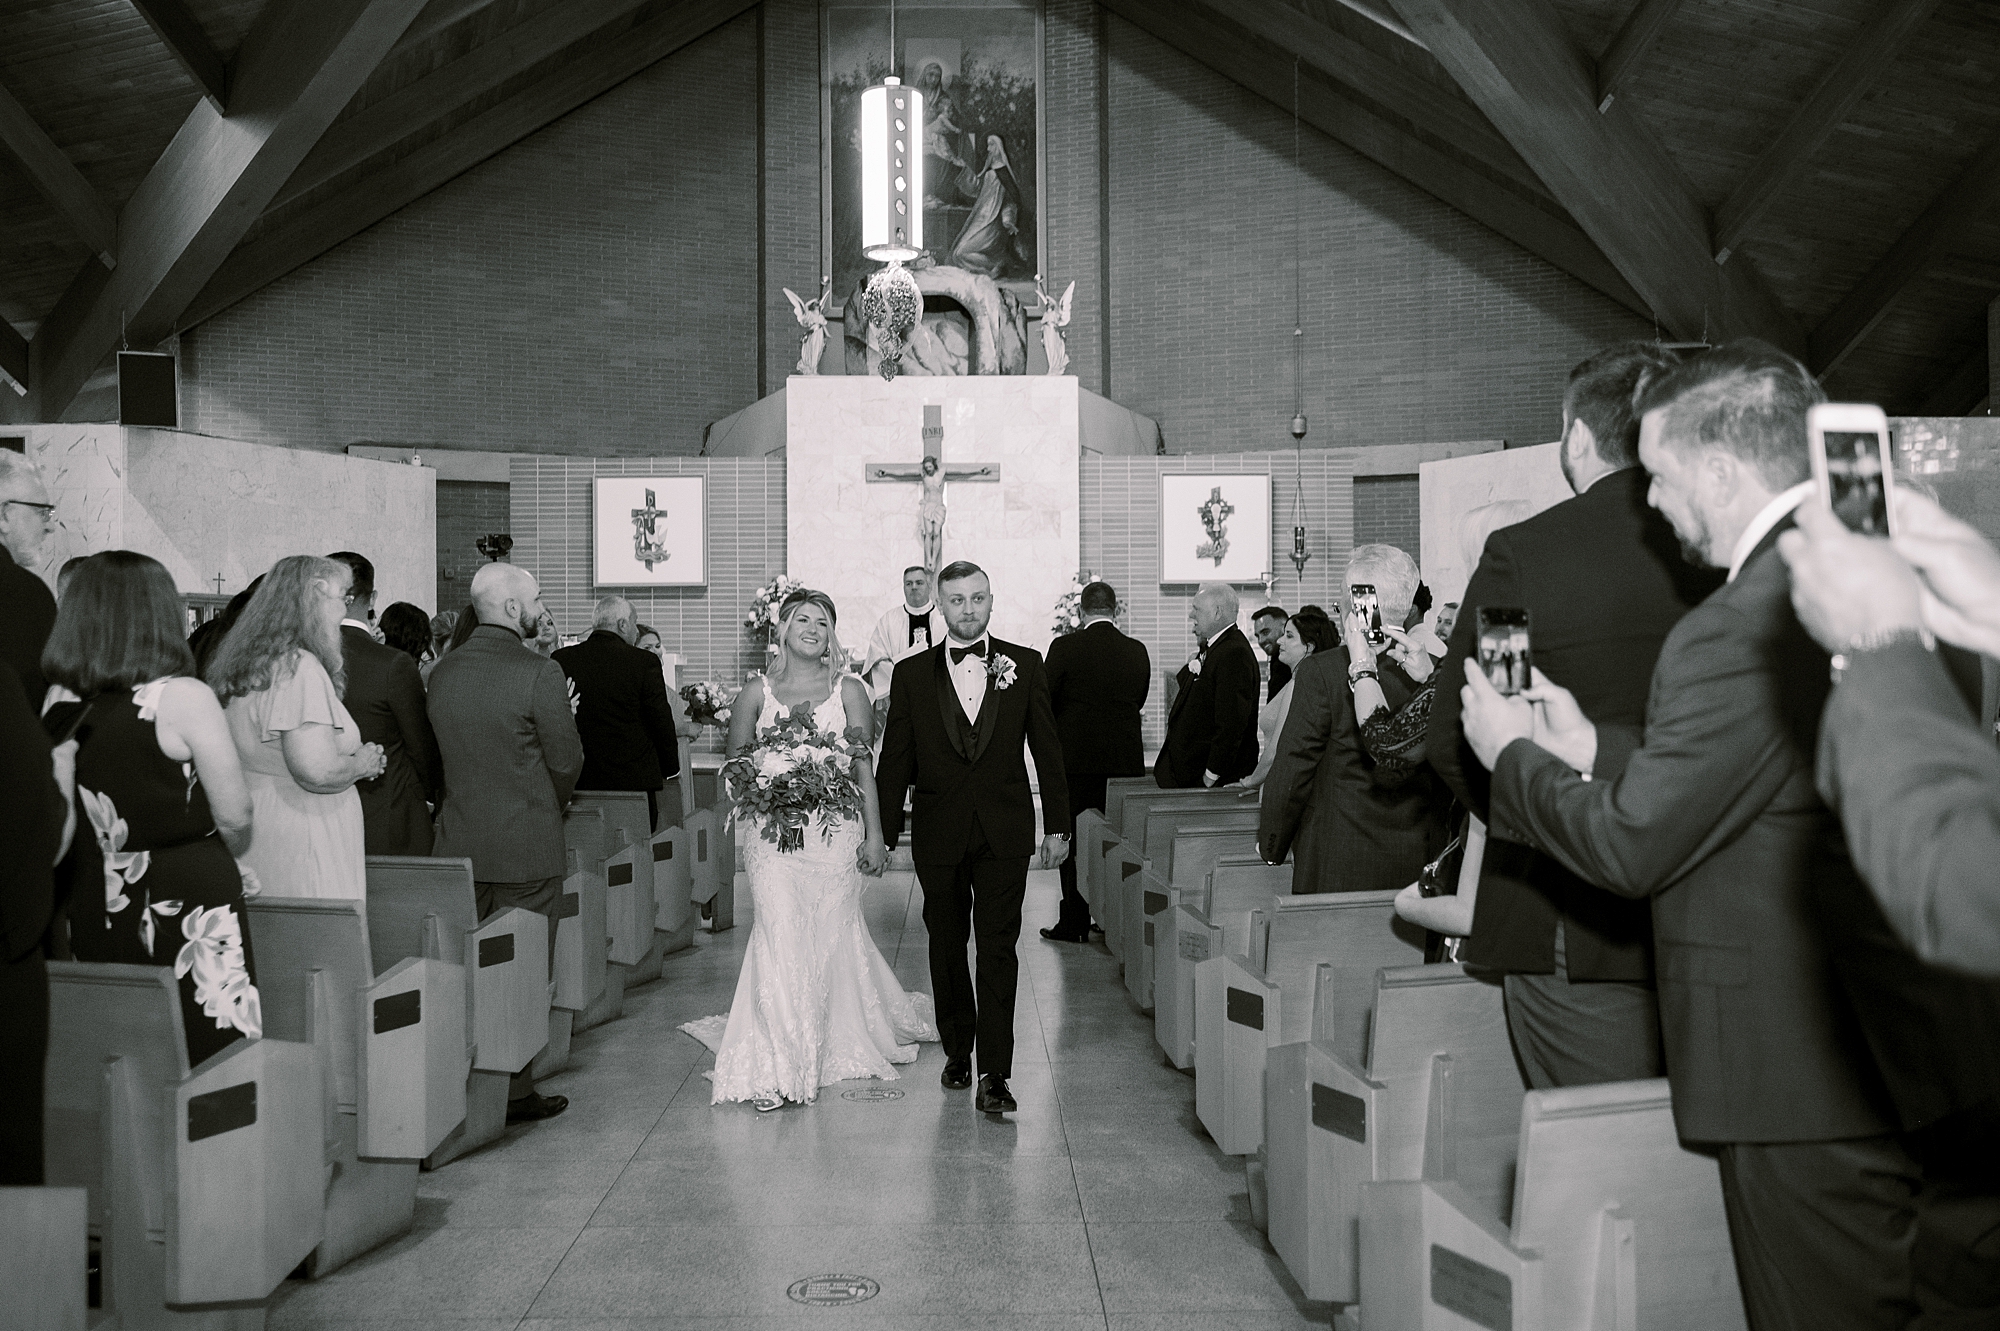 couple walks up aisle after wedding ceremony in New Jersey